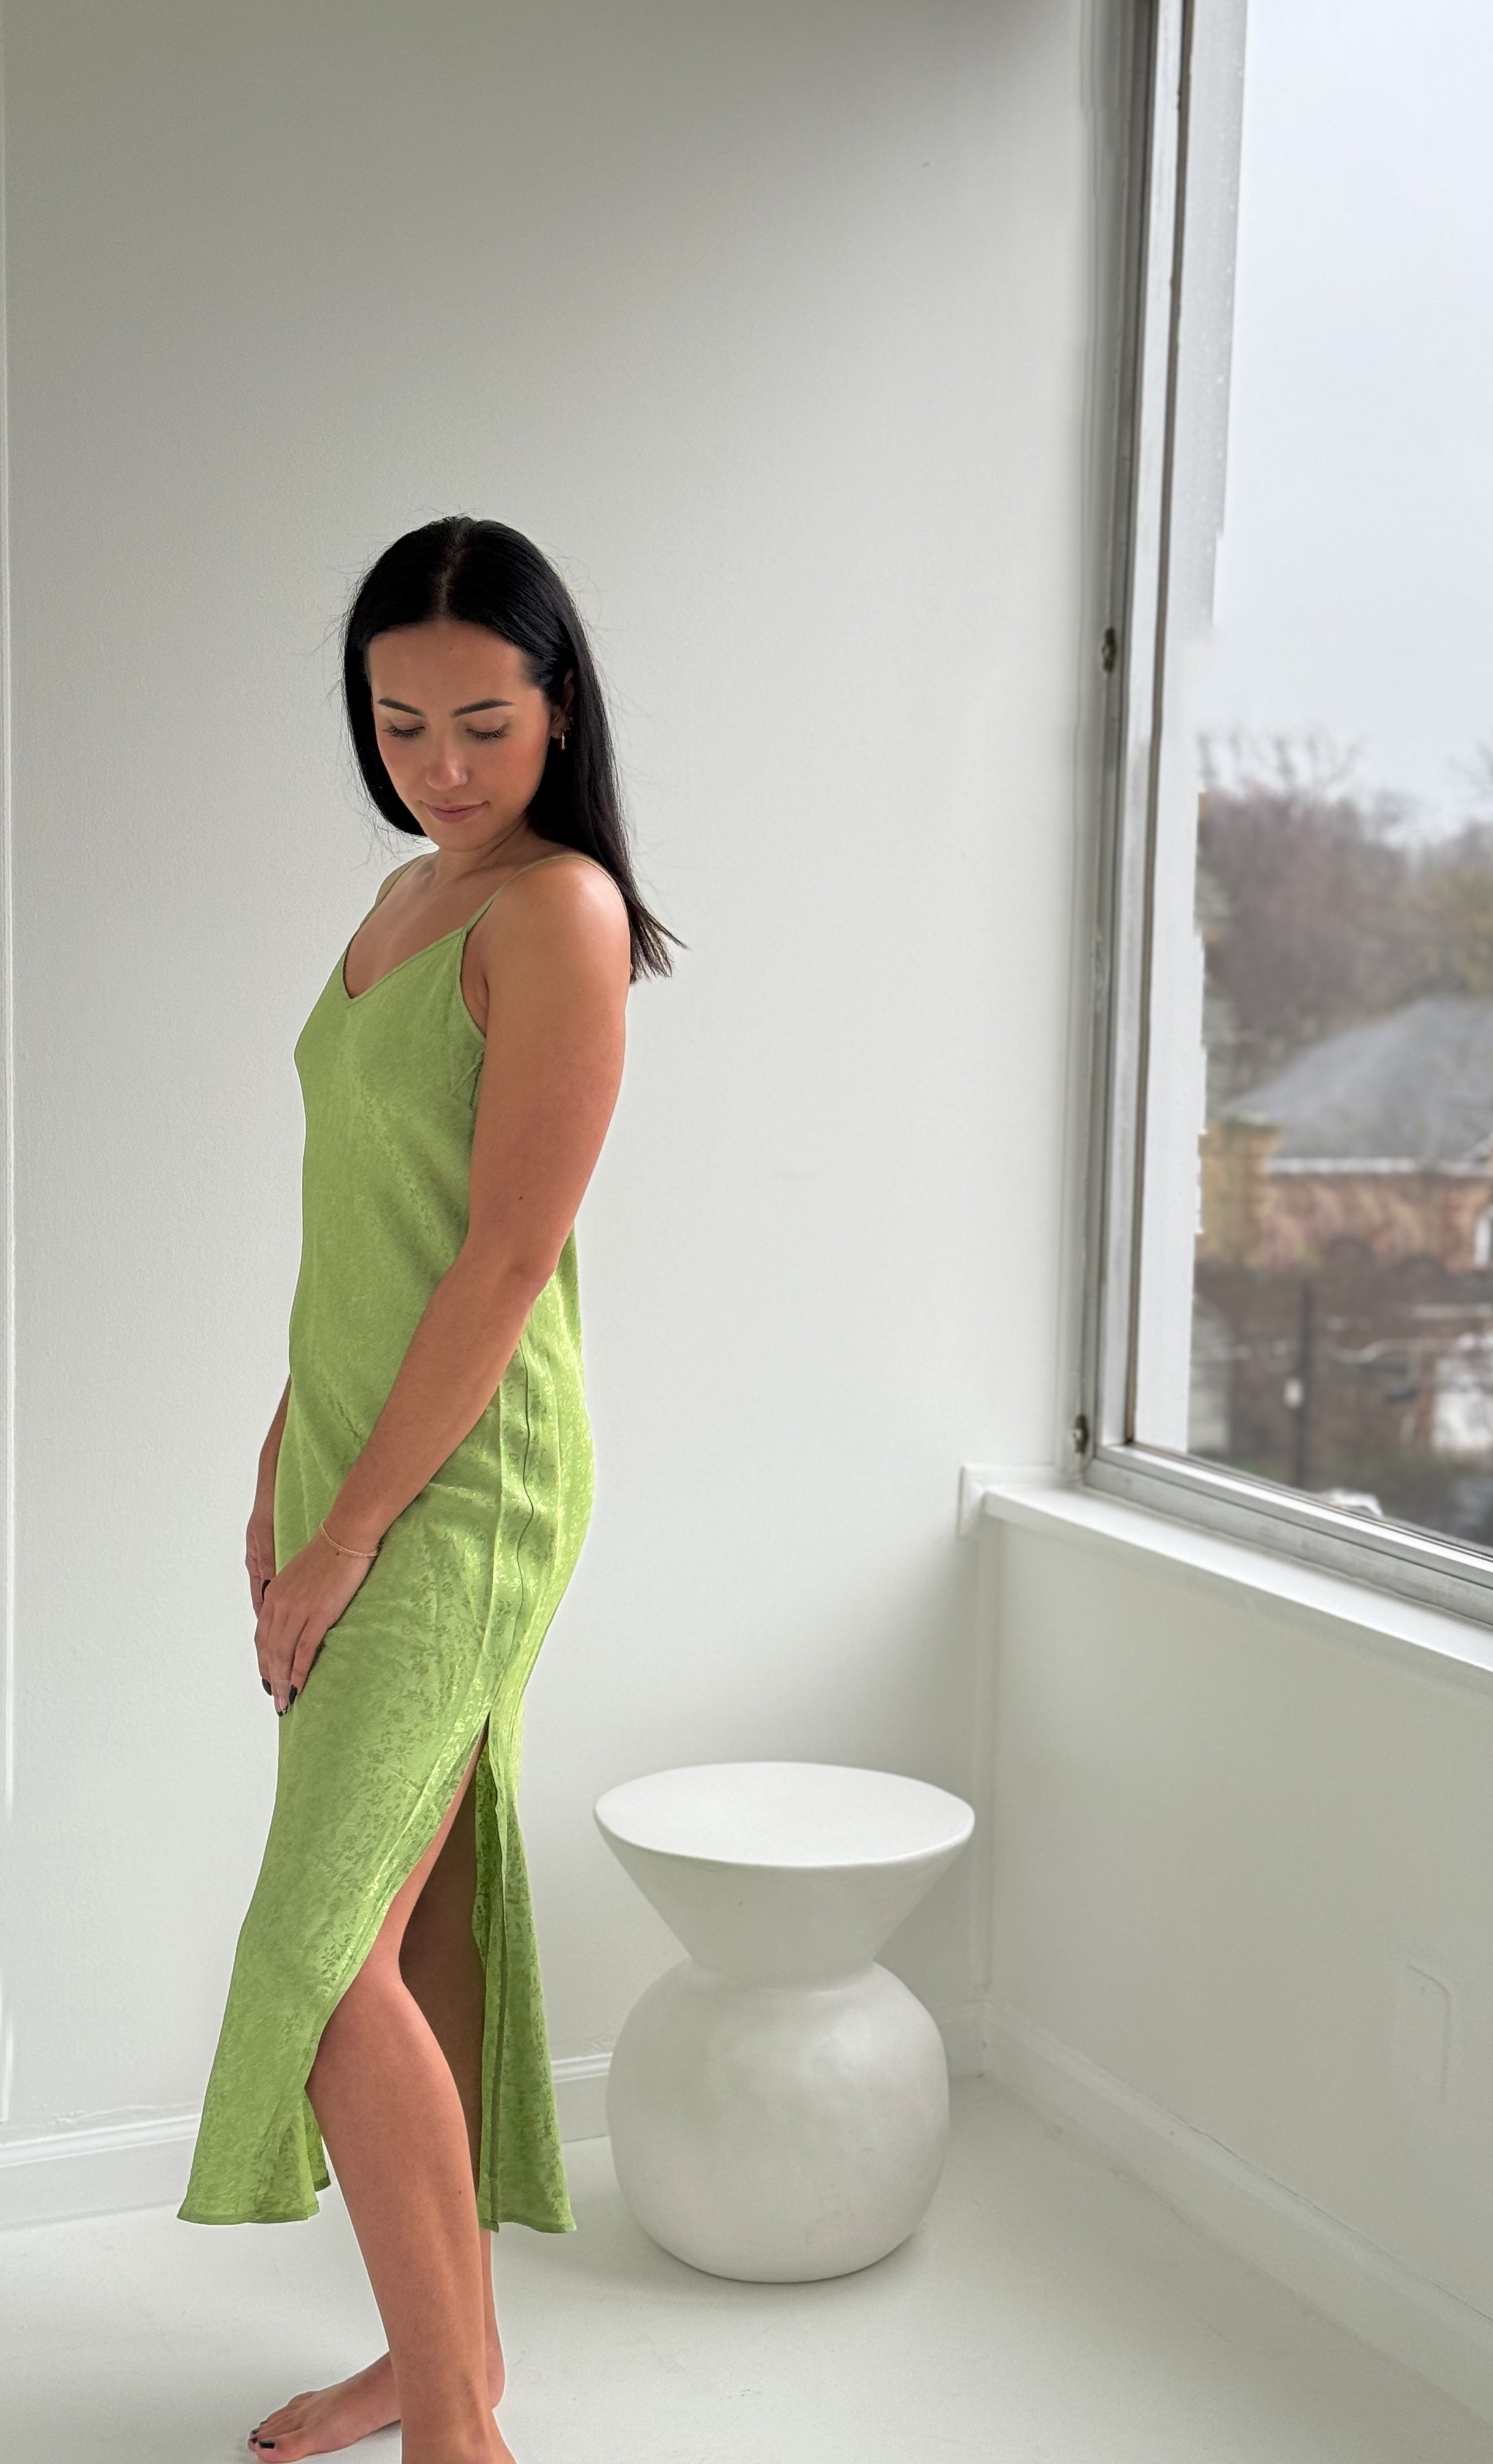 Slip dress, green lime, side slit, size extra small to large. Floral print foil, monochromatic chic.